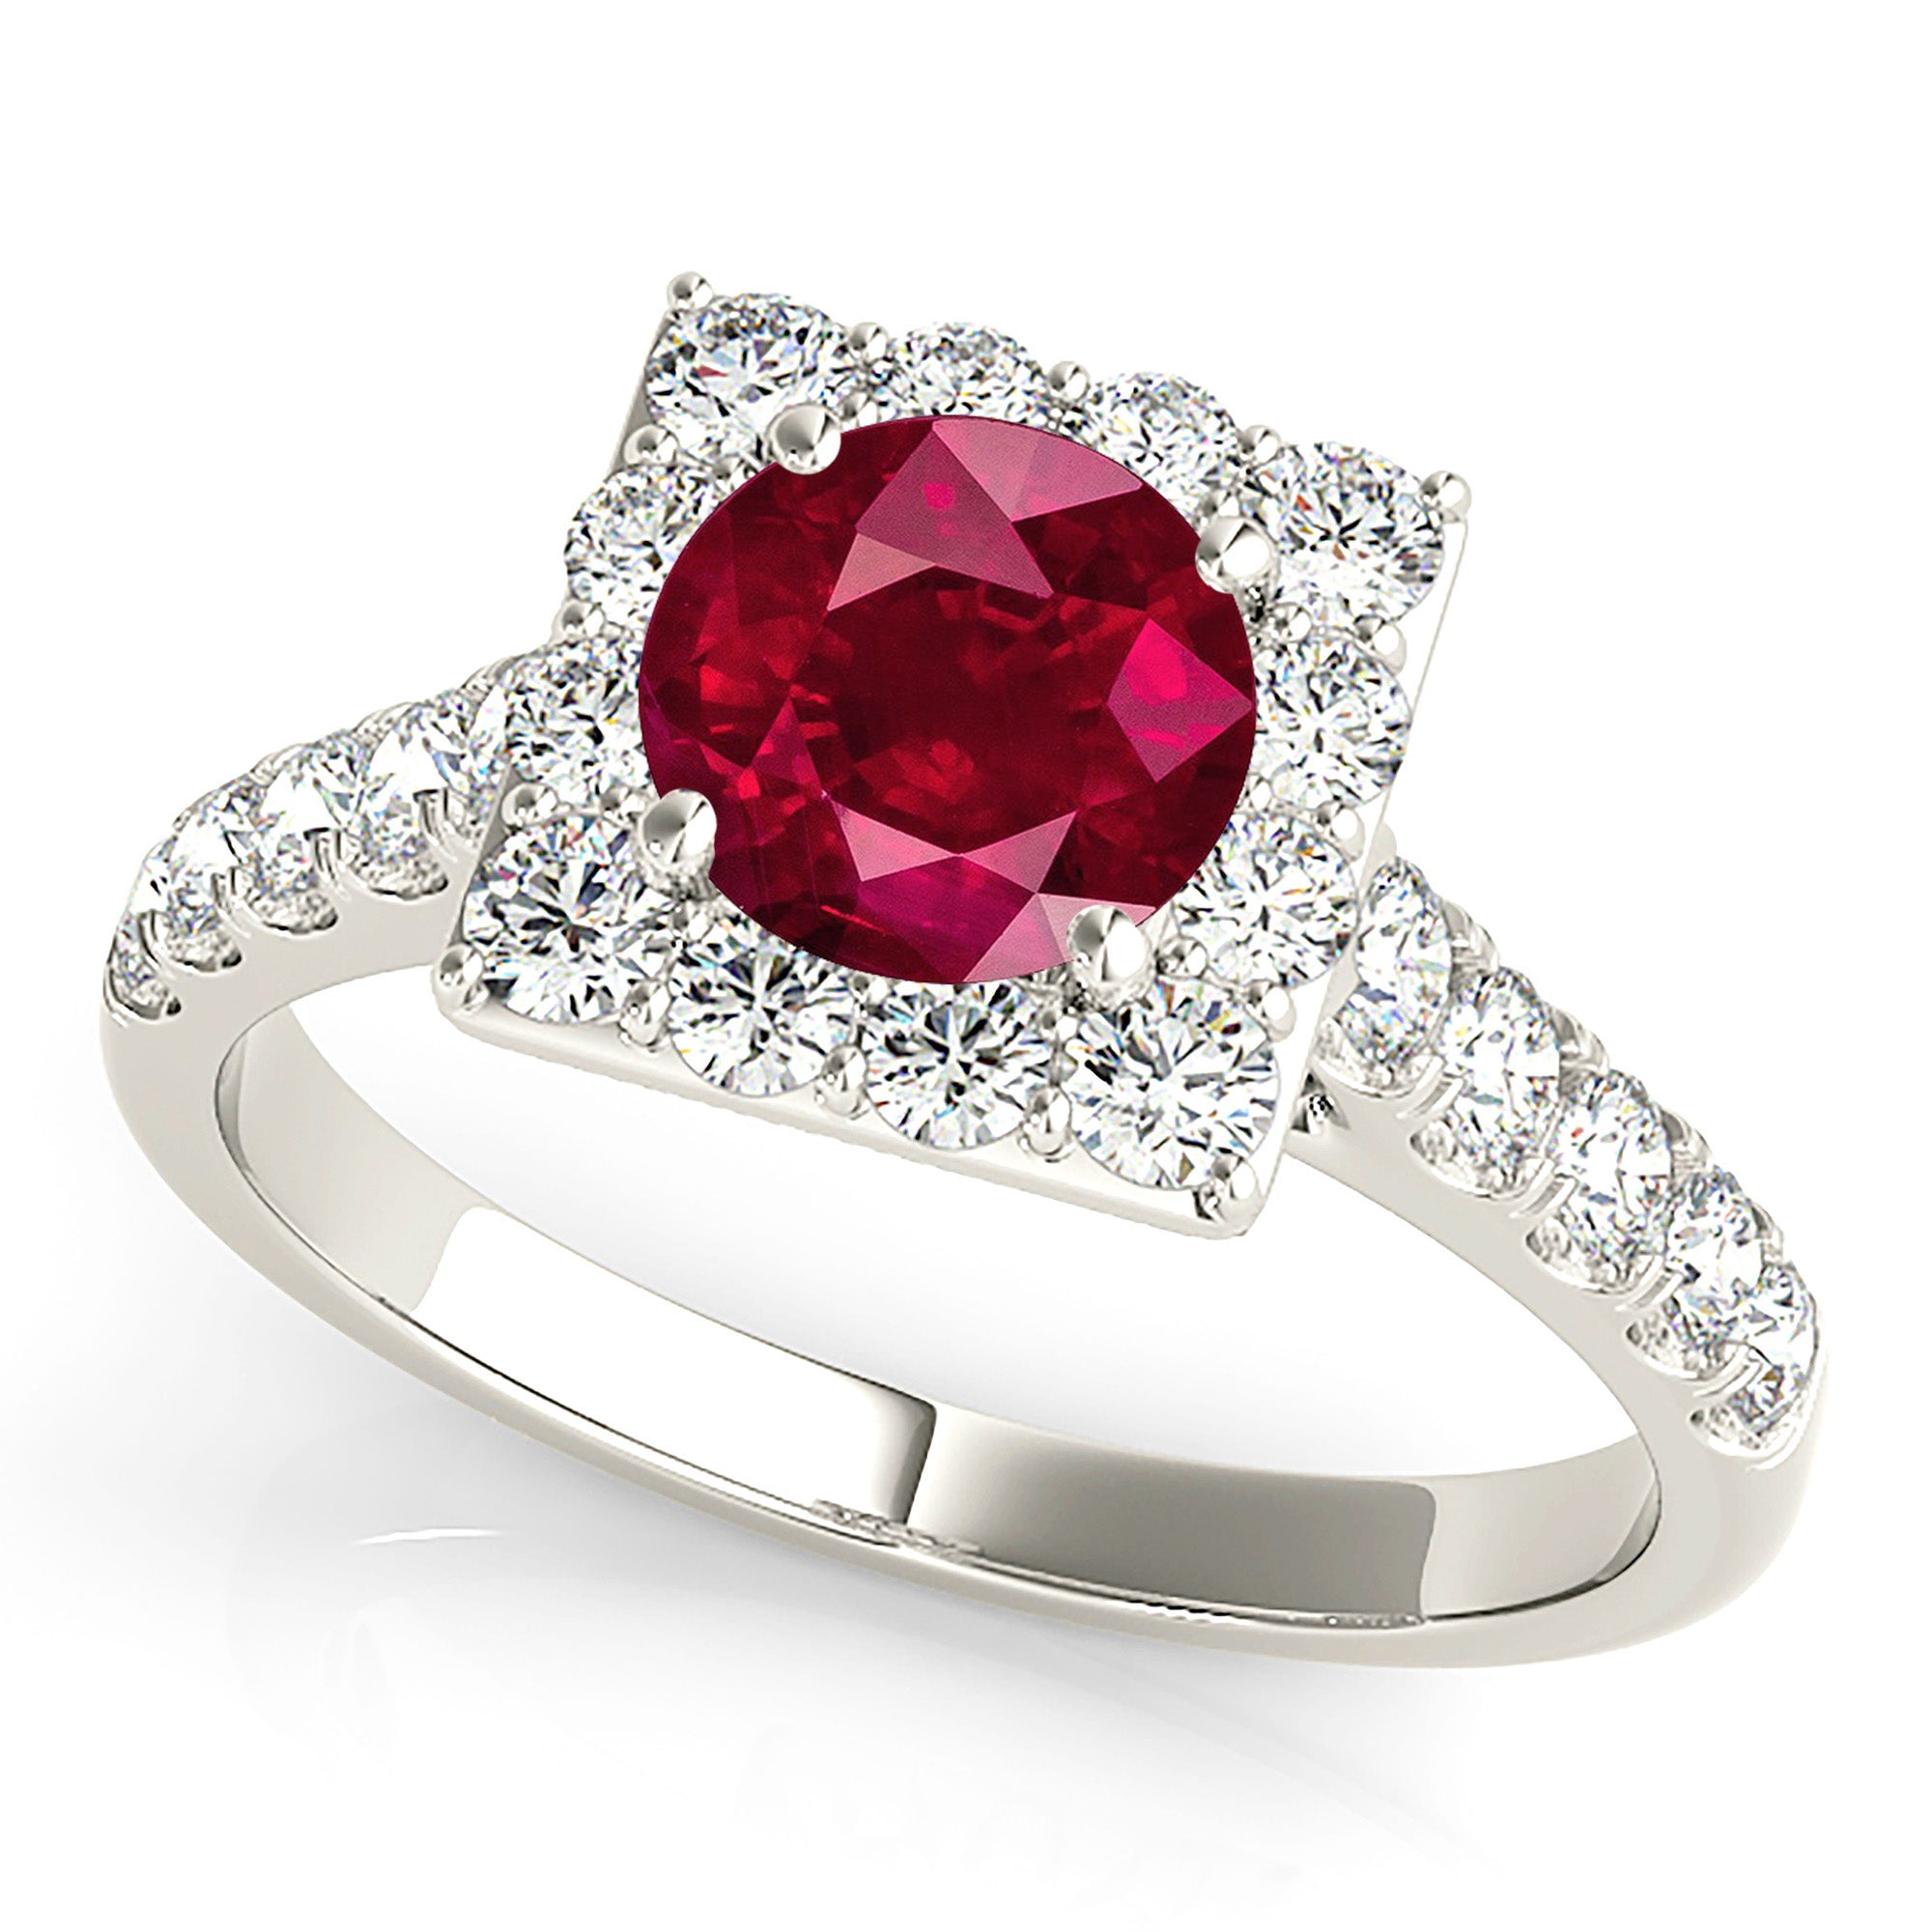 1.35 ct. Genuine Ruby Ring With 0.75 ctw. Diamond Square Halo And Simple Diamond Band-in 14K/18K White, Yellow, Rose Gold and Platinum - Christmas Jewelry Gift -VIRABYANI